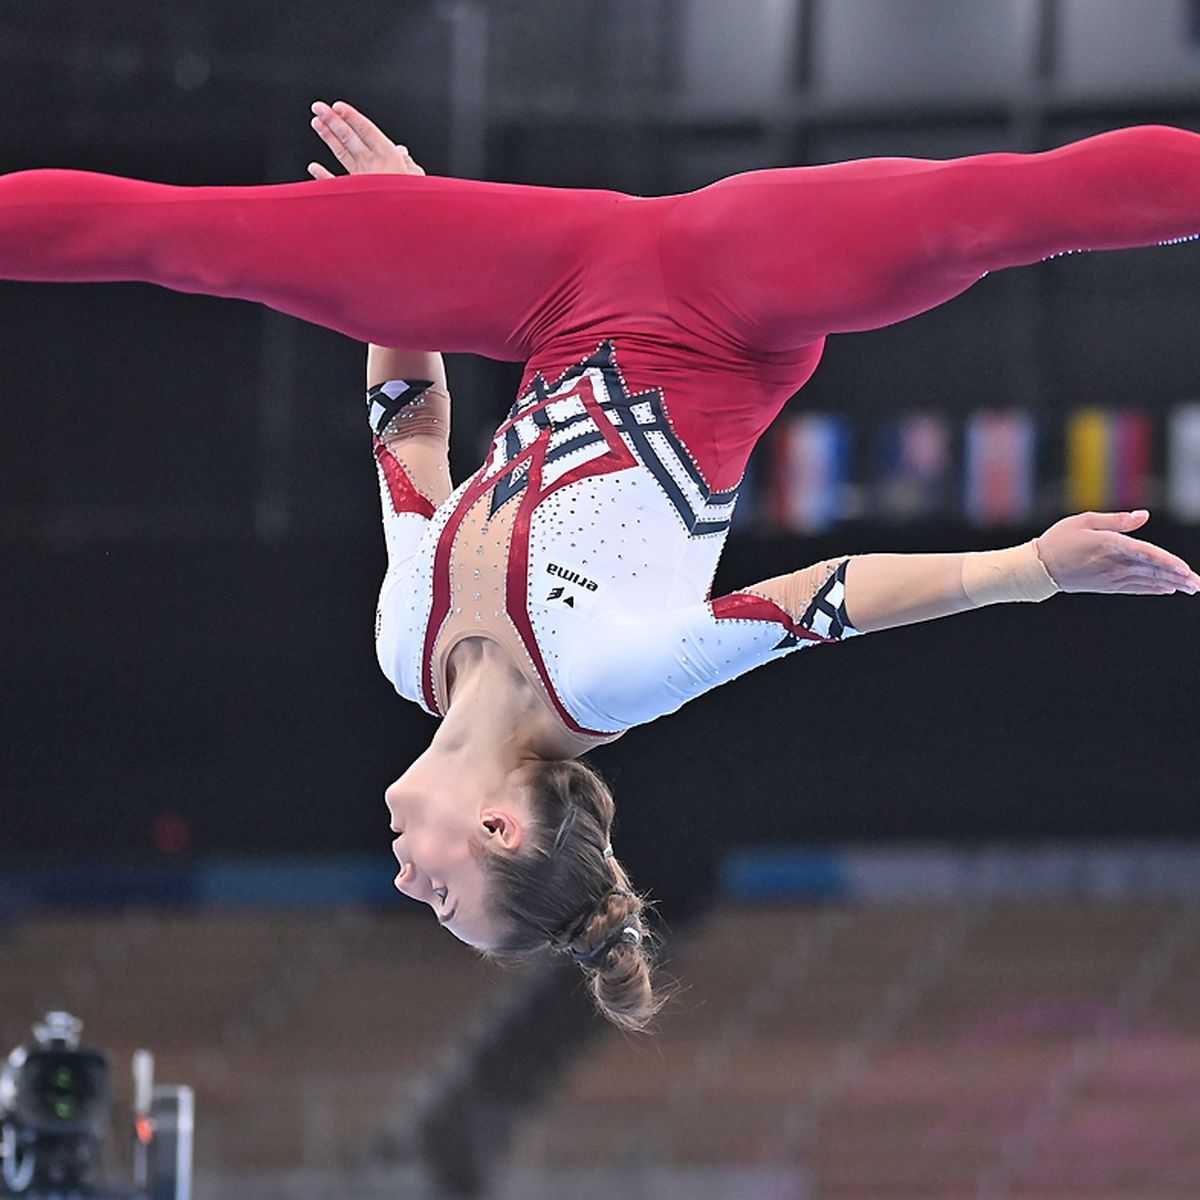 GK Elite Vaults Into Media With Olympic Leotard Debuts